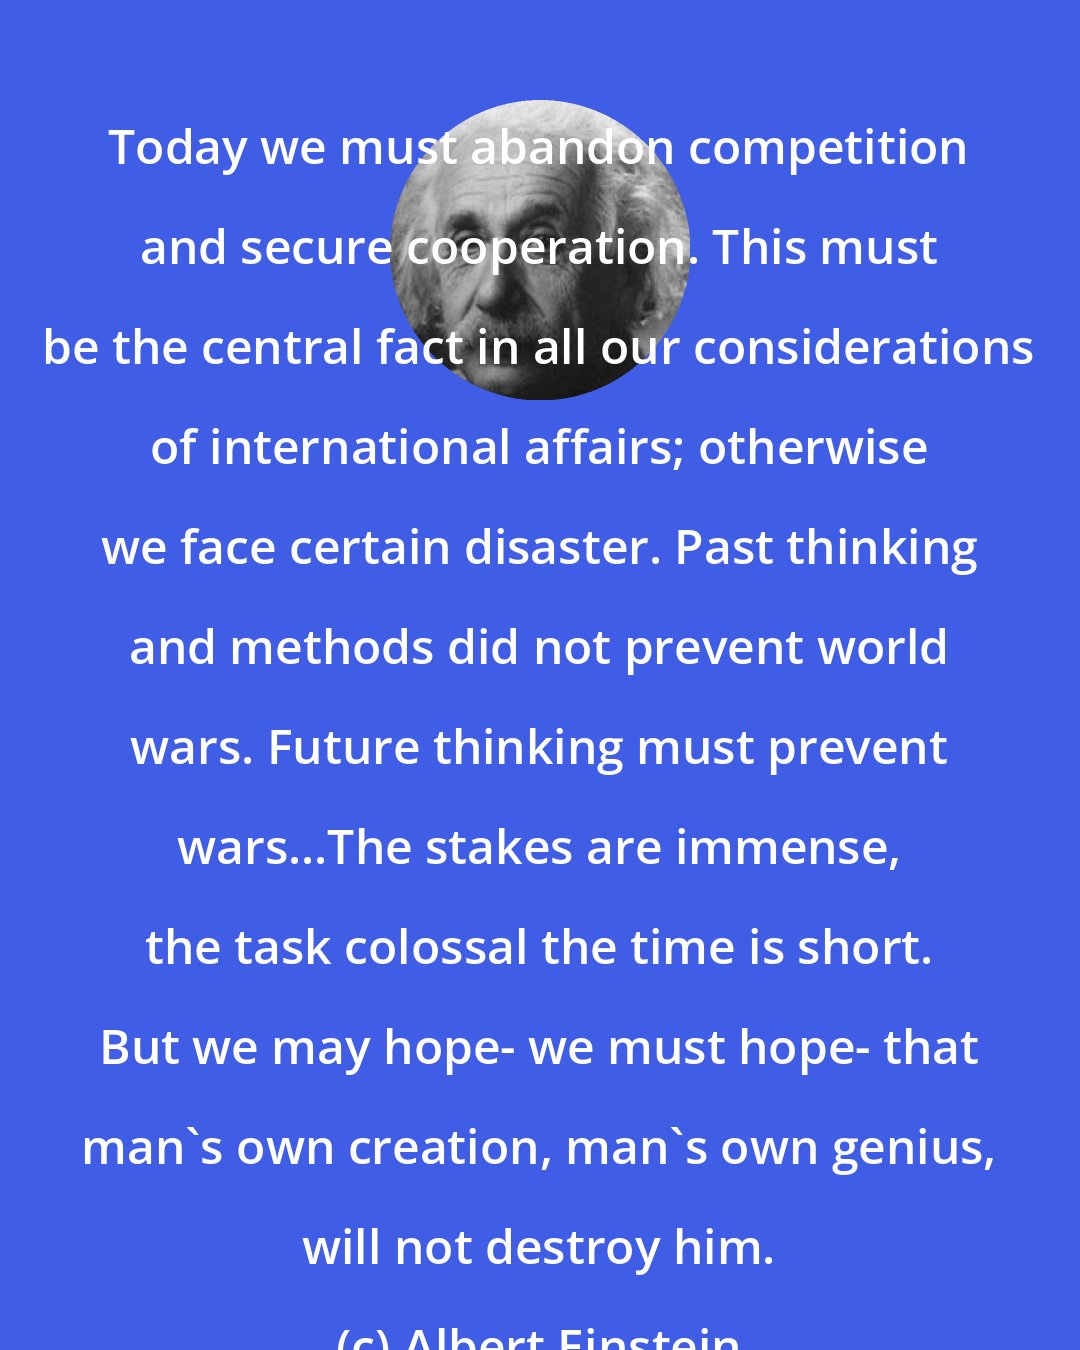 Albert Einstein: Today we must abandon competition and secure cooperation. This must be the central fact in all our considerations of international affairs; otherwise we face certain disaster. Past thinking and methods did not prevent world wars. Future thinking must prevent wars...The stakes are immense, the task colossal the time is short. But we may hope- we must hope- that man's own creation, man's own genius, will not destroy him.